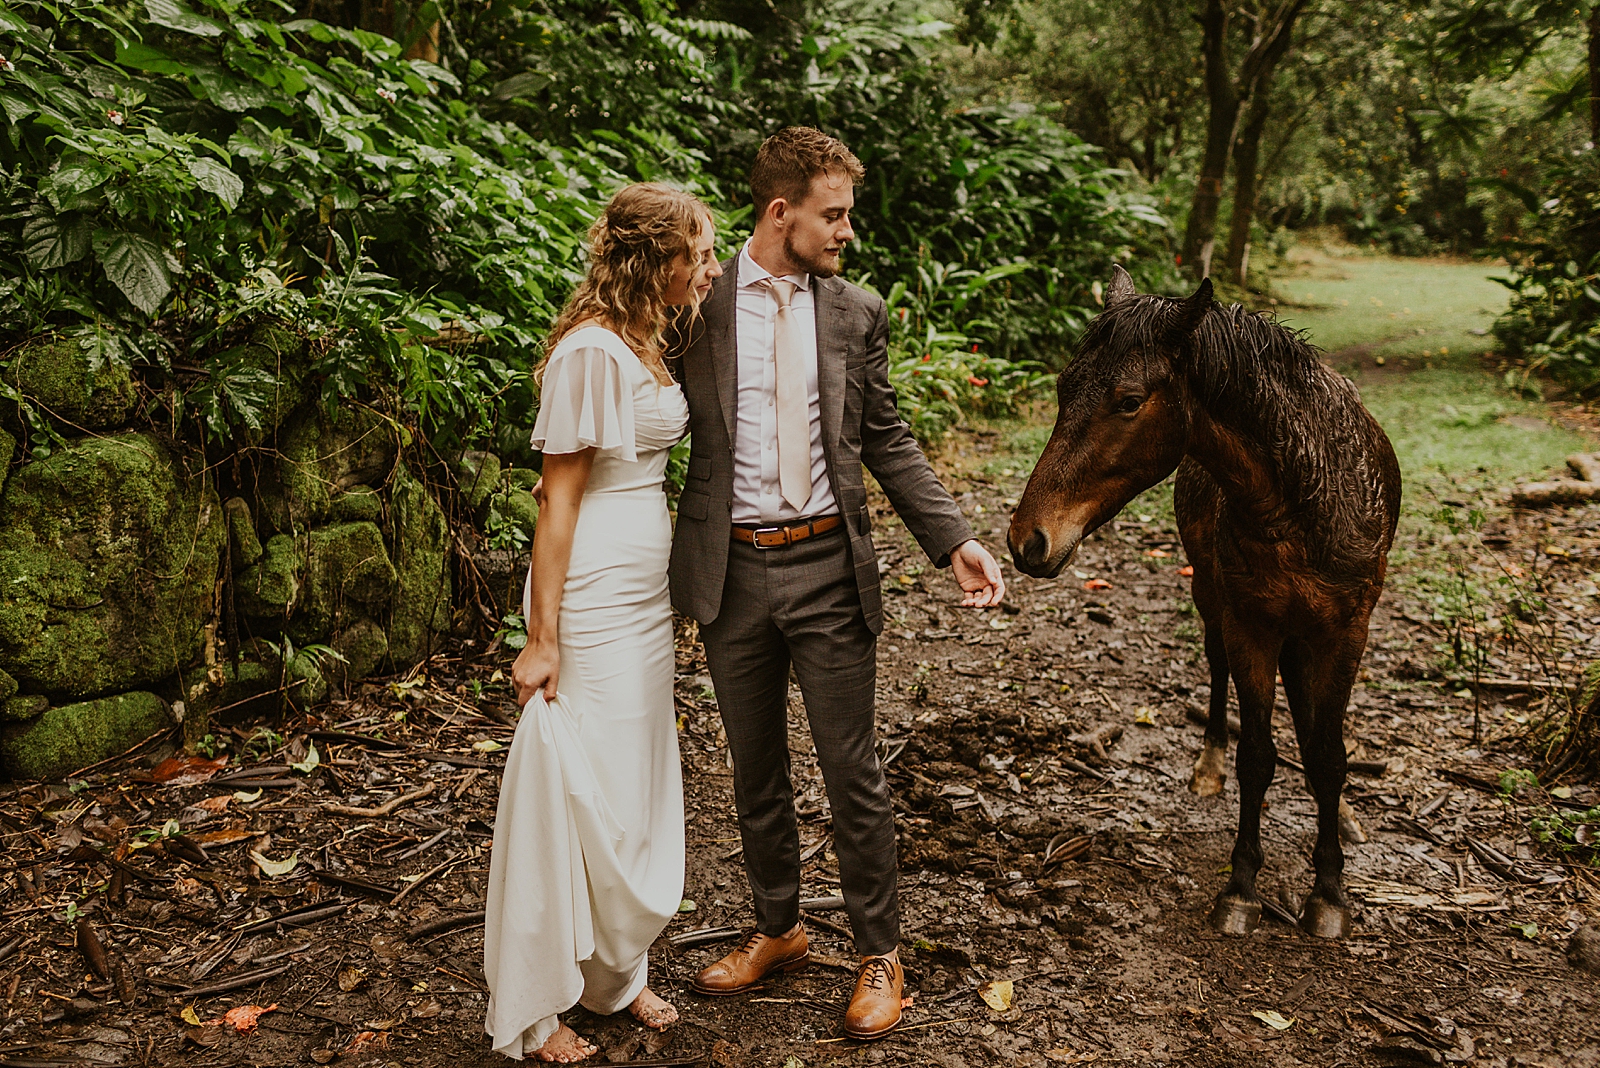 Bride and Groom looking at horse in green forest